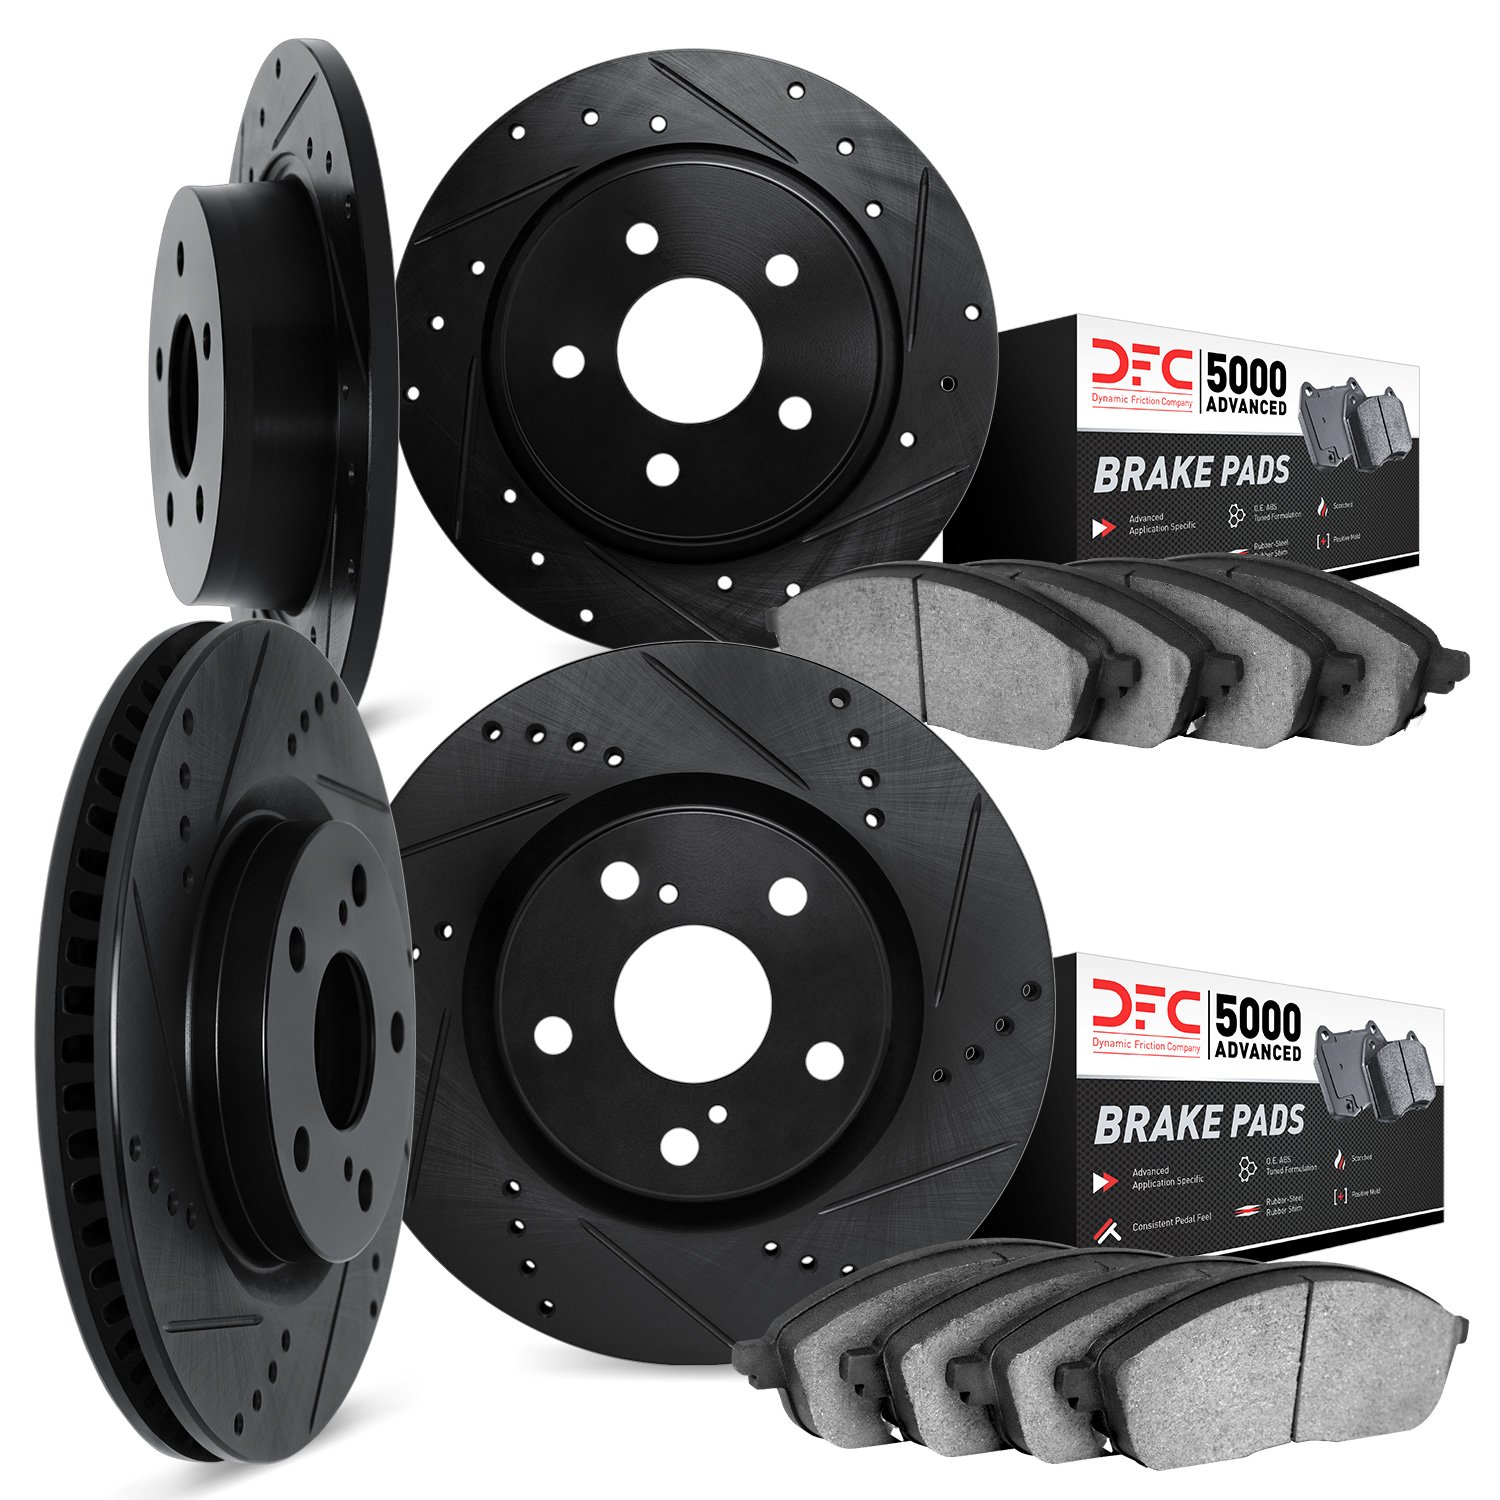 8504-76140 Drilled/Slotted Brake Rotors w/5000 Advanced Brake Pads Kit [Black], 2003-2006 Lexus/Toyota/Scion, Position: Front an